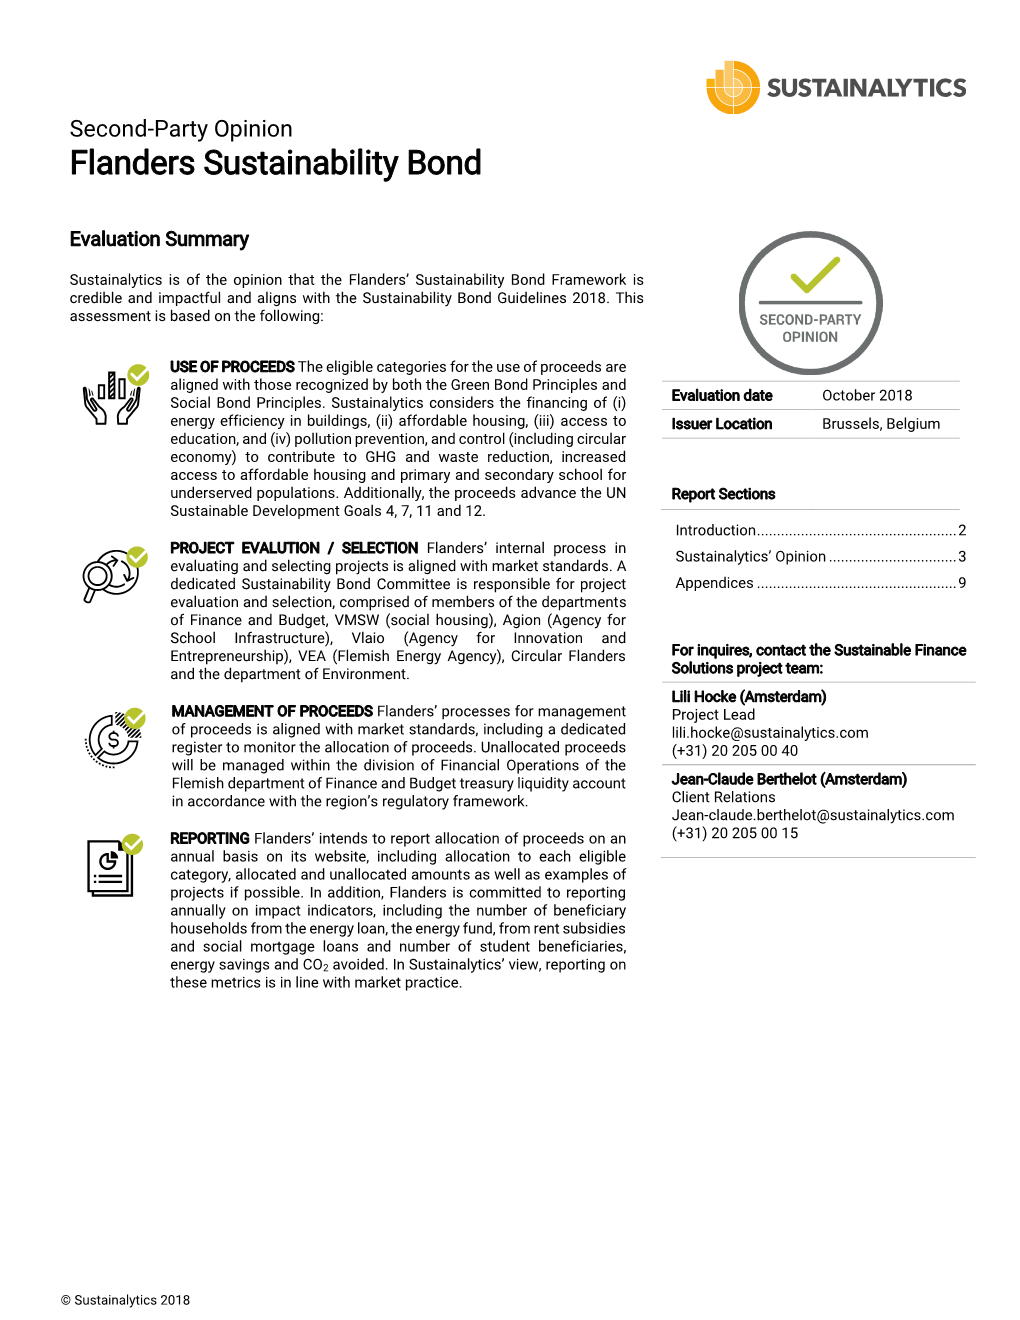 Flanders Sustainability Bond Second-Party Opinion